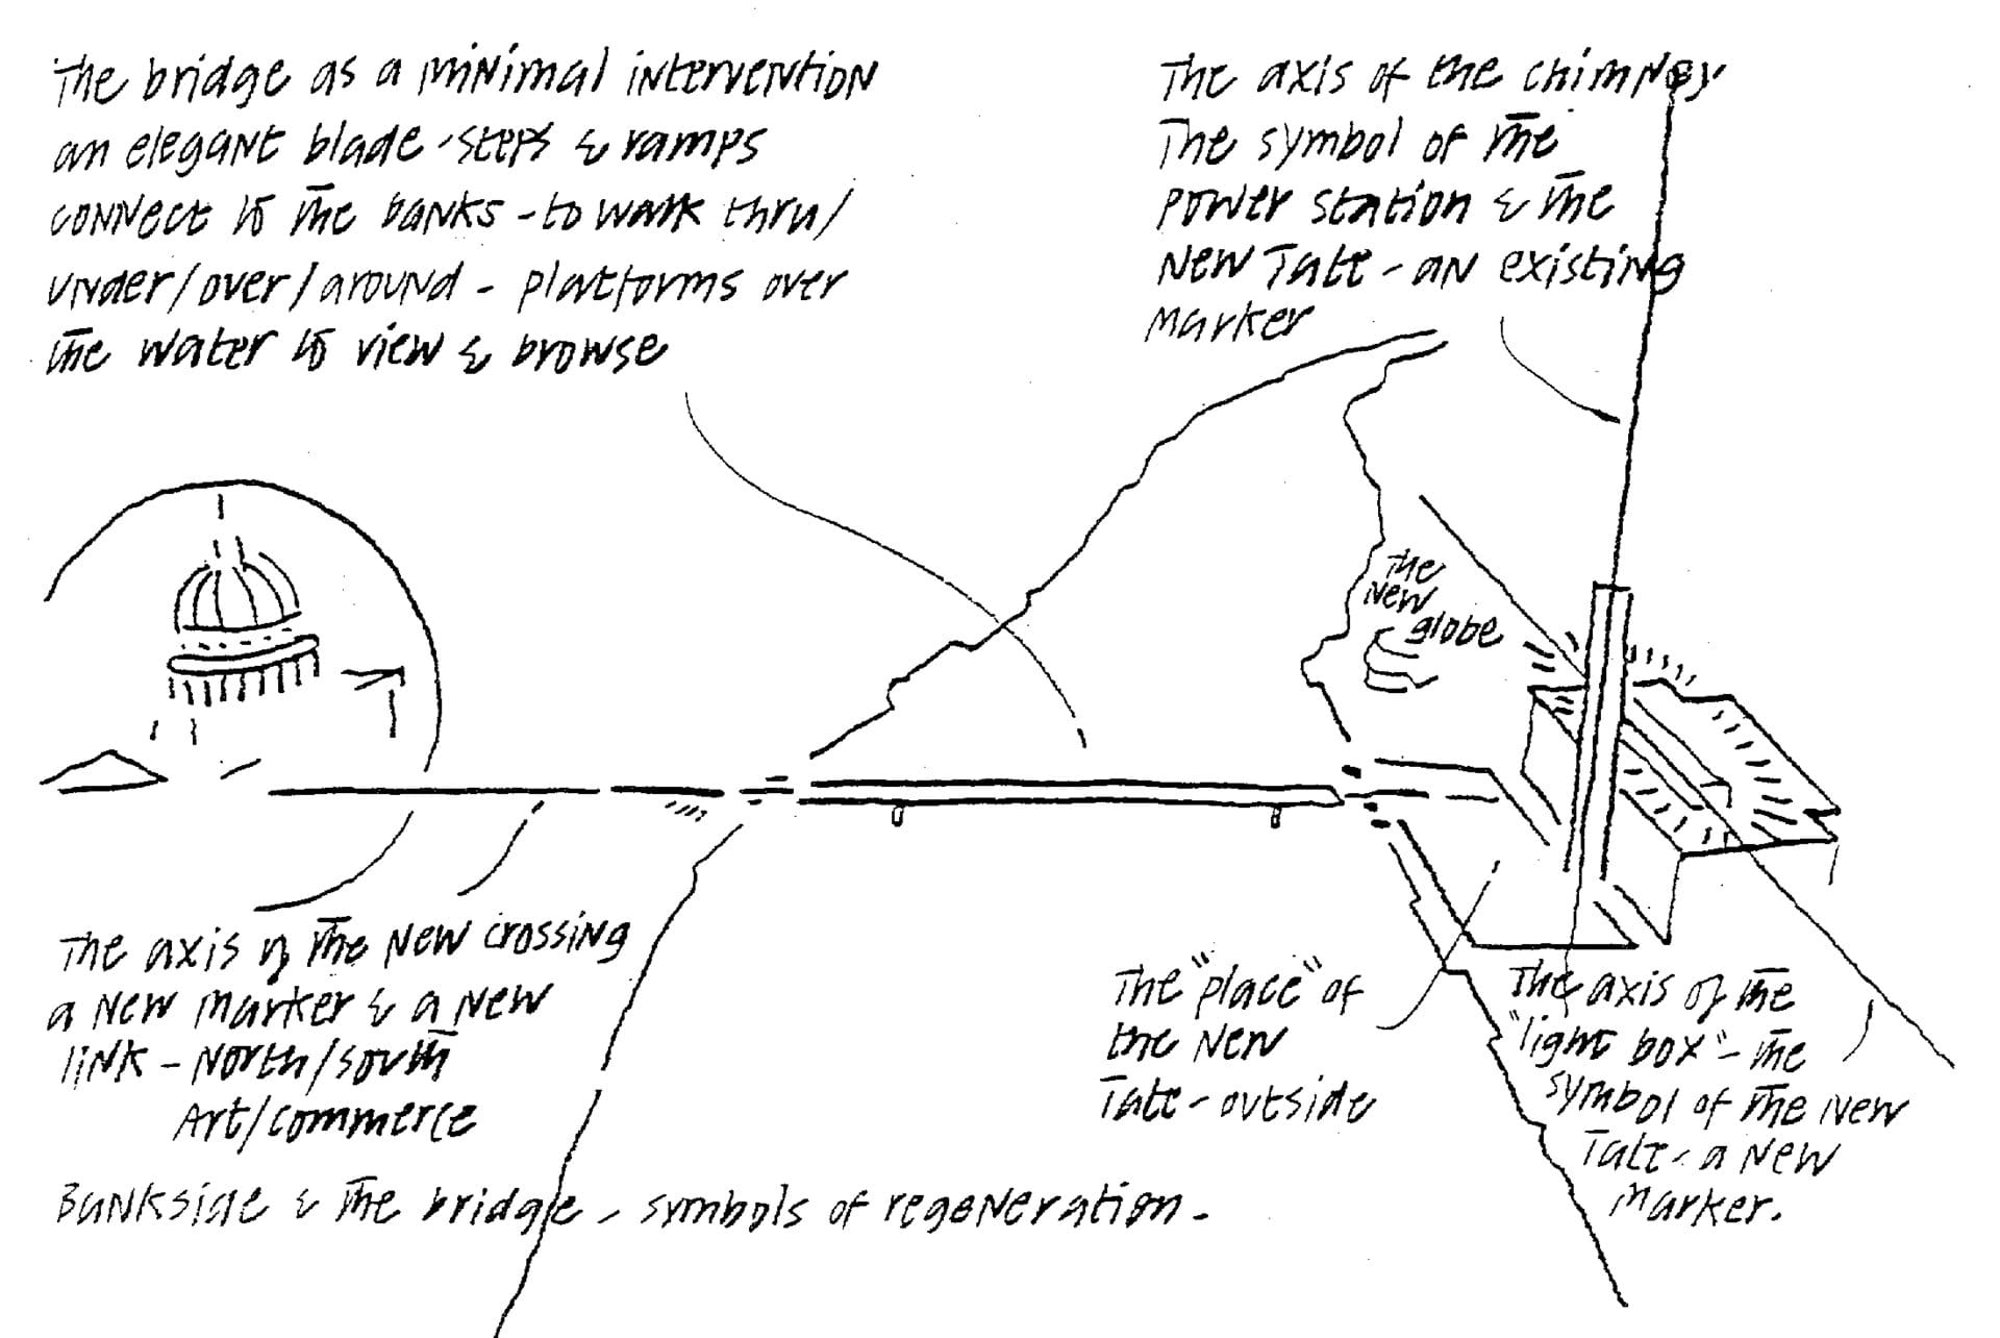 Norman Foster’s conceptual sketch exploring the symbolism of the new bridge, in which he describes the structure as ‘a minimal intervention – an elegant blade’. © Norman Foster